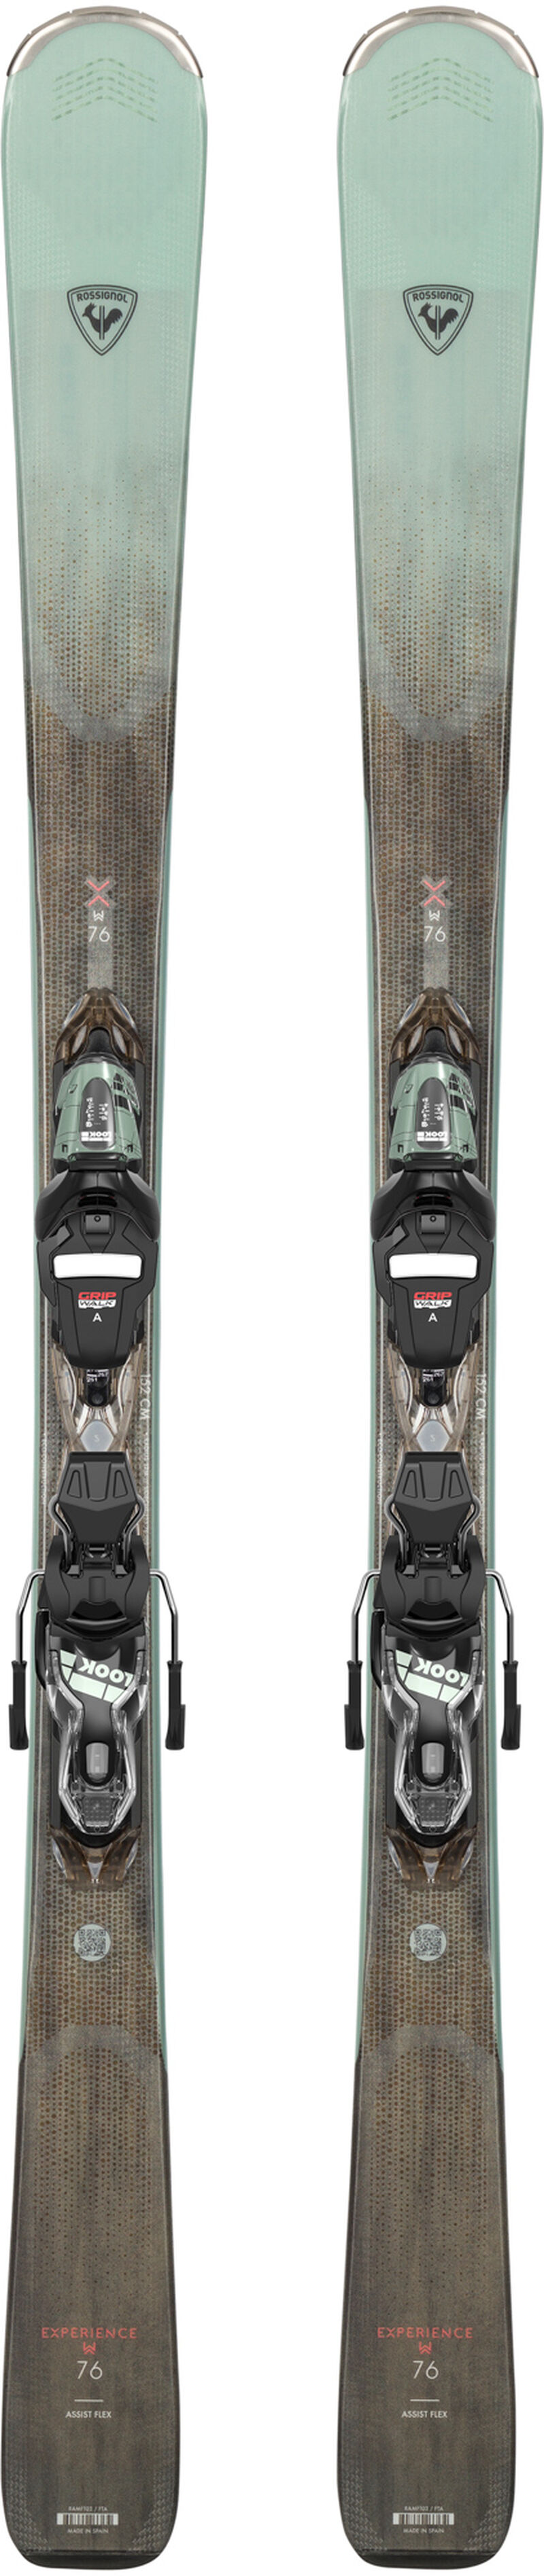 Rossignol EXPERIENCE W 76 XPRESS 